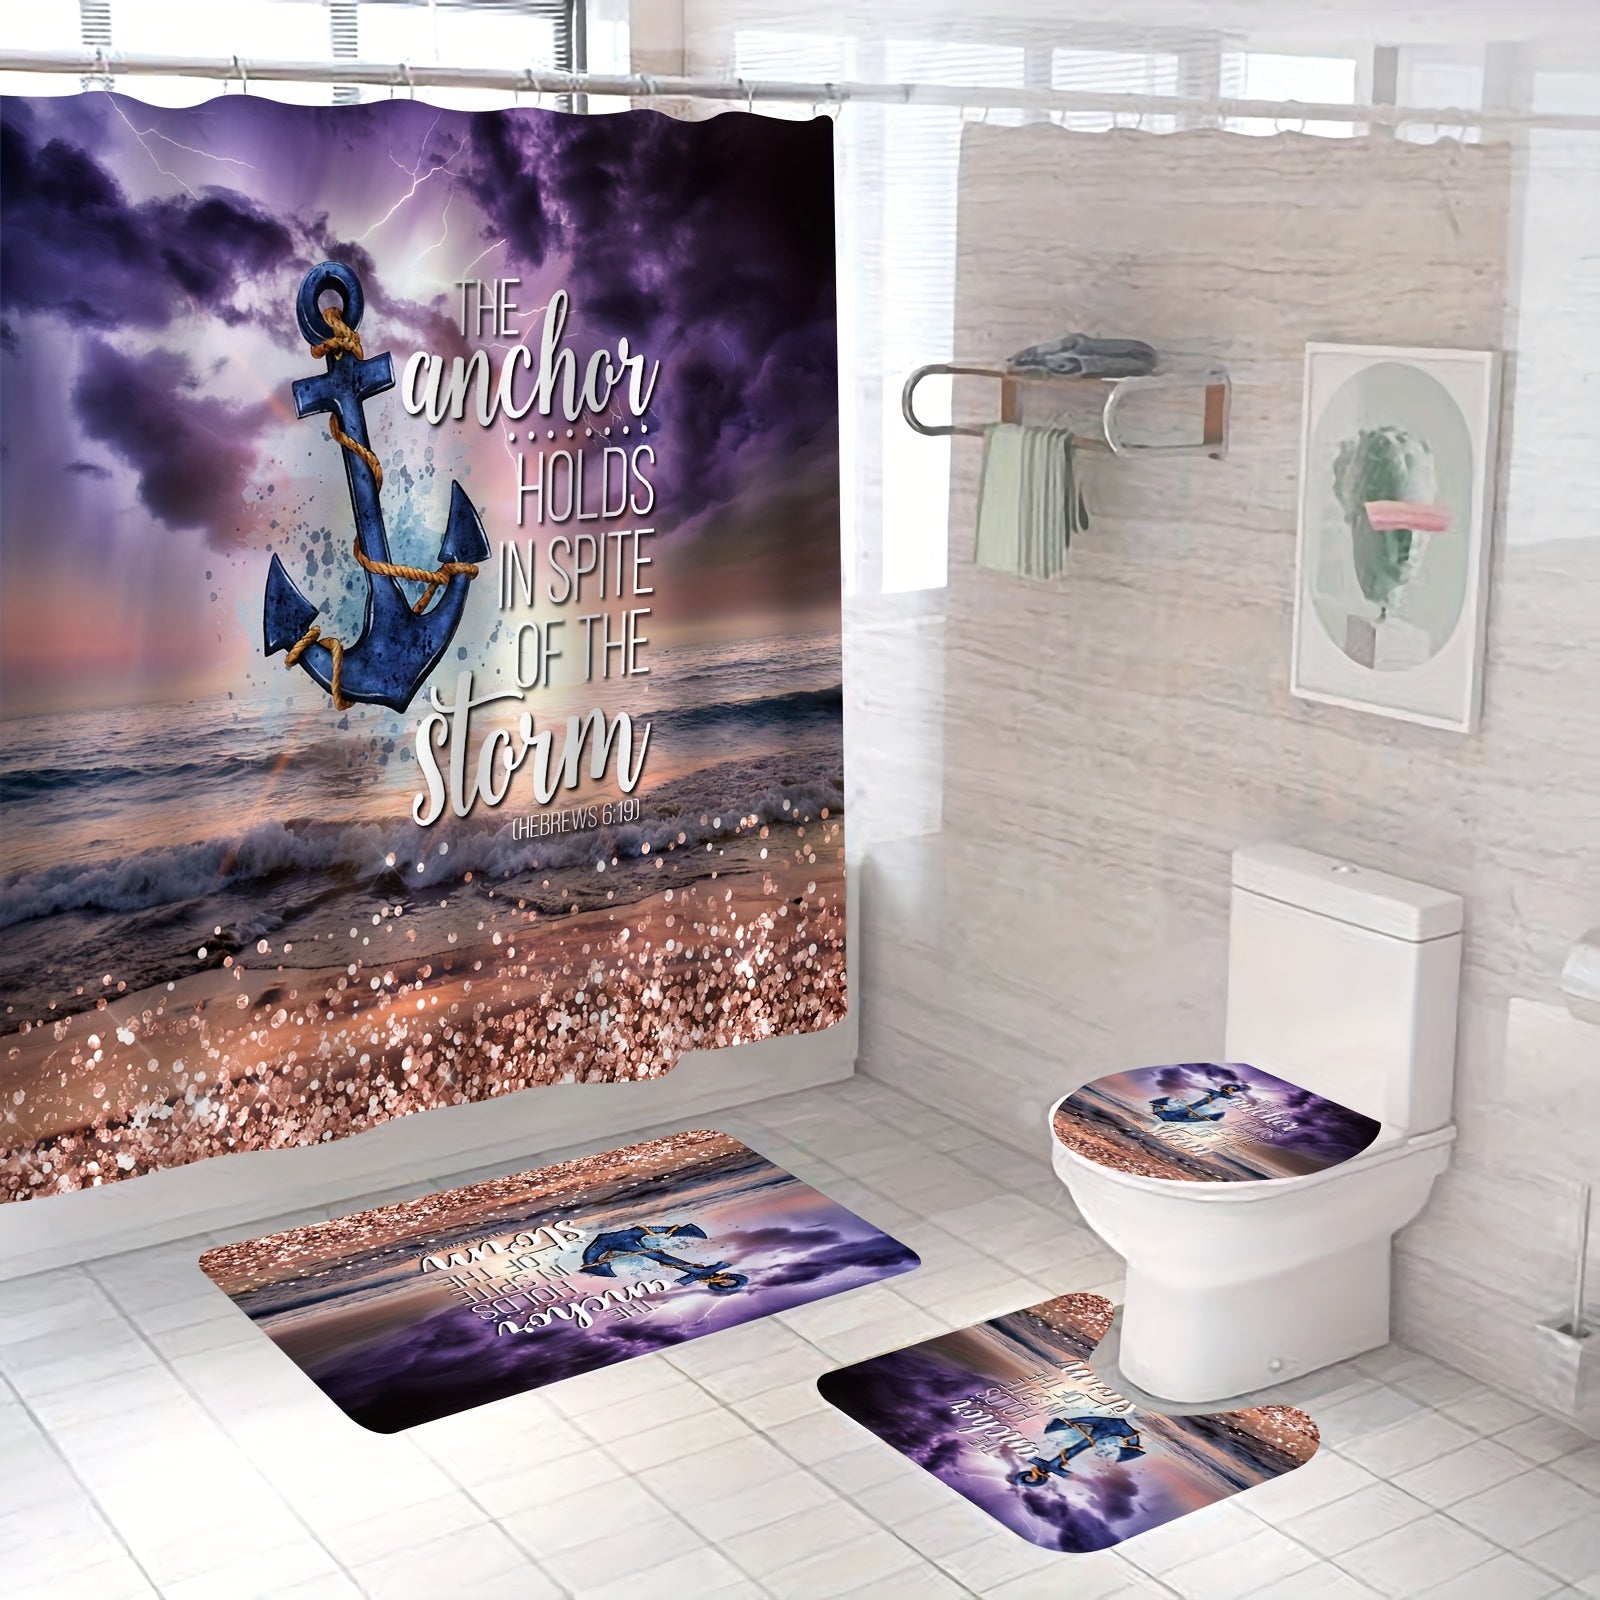 1/4pcs The Anchor Holds In Spite Of The Storm Christian Shower Curtain With 12 Hooks, Non-Slip Bath Rug, U-Shape Mat, Toilet Lid Cover Pad claimedbygoddesigns